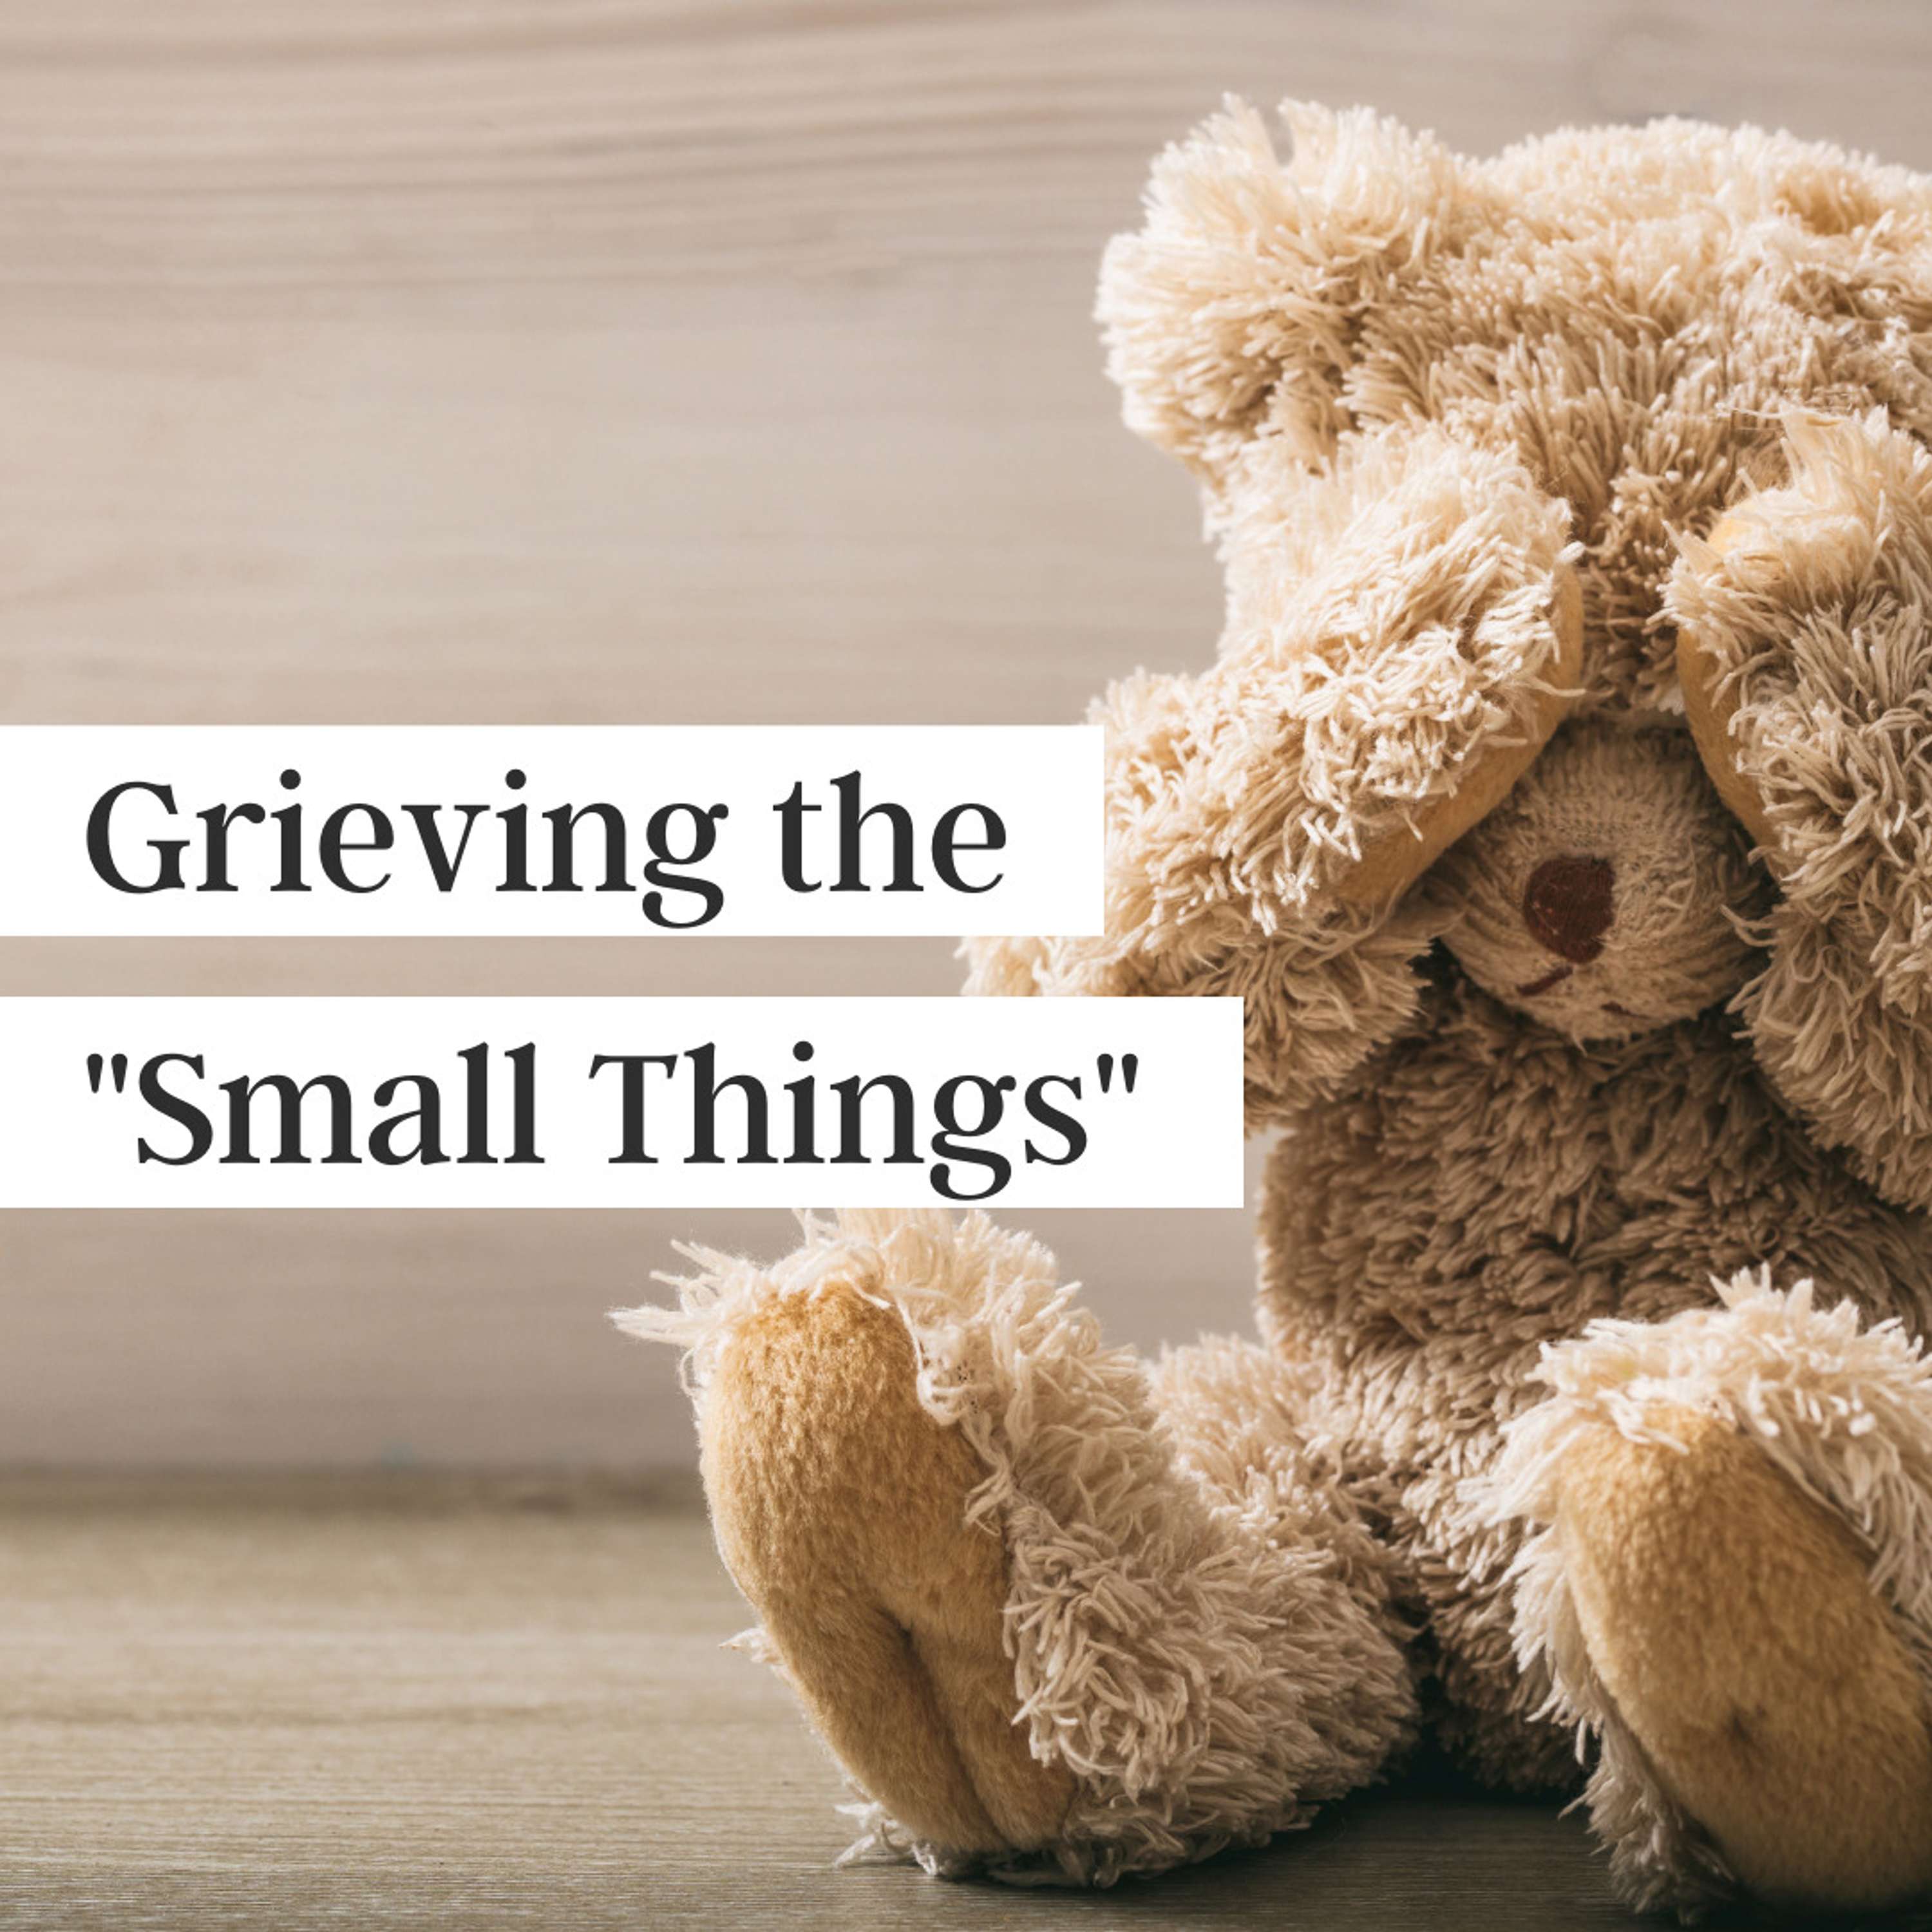 Grieving the ”Small Things”